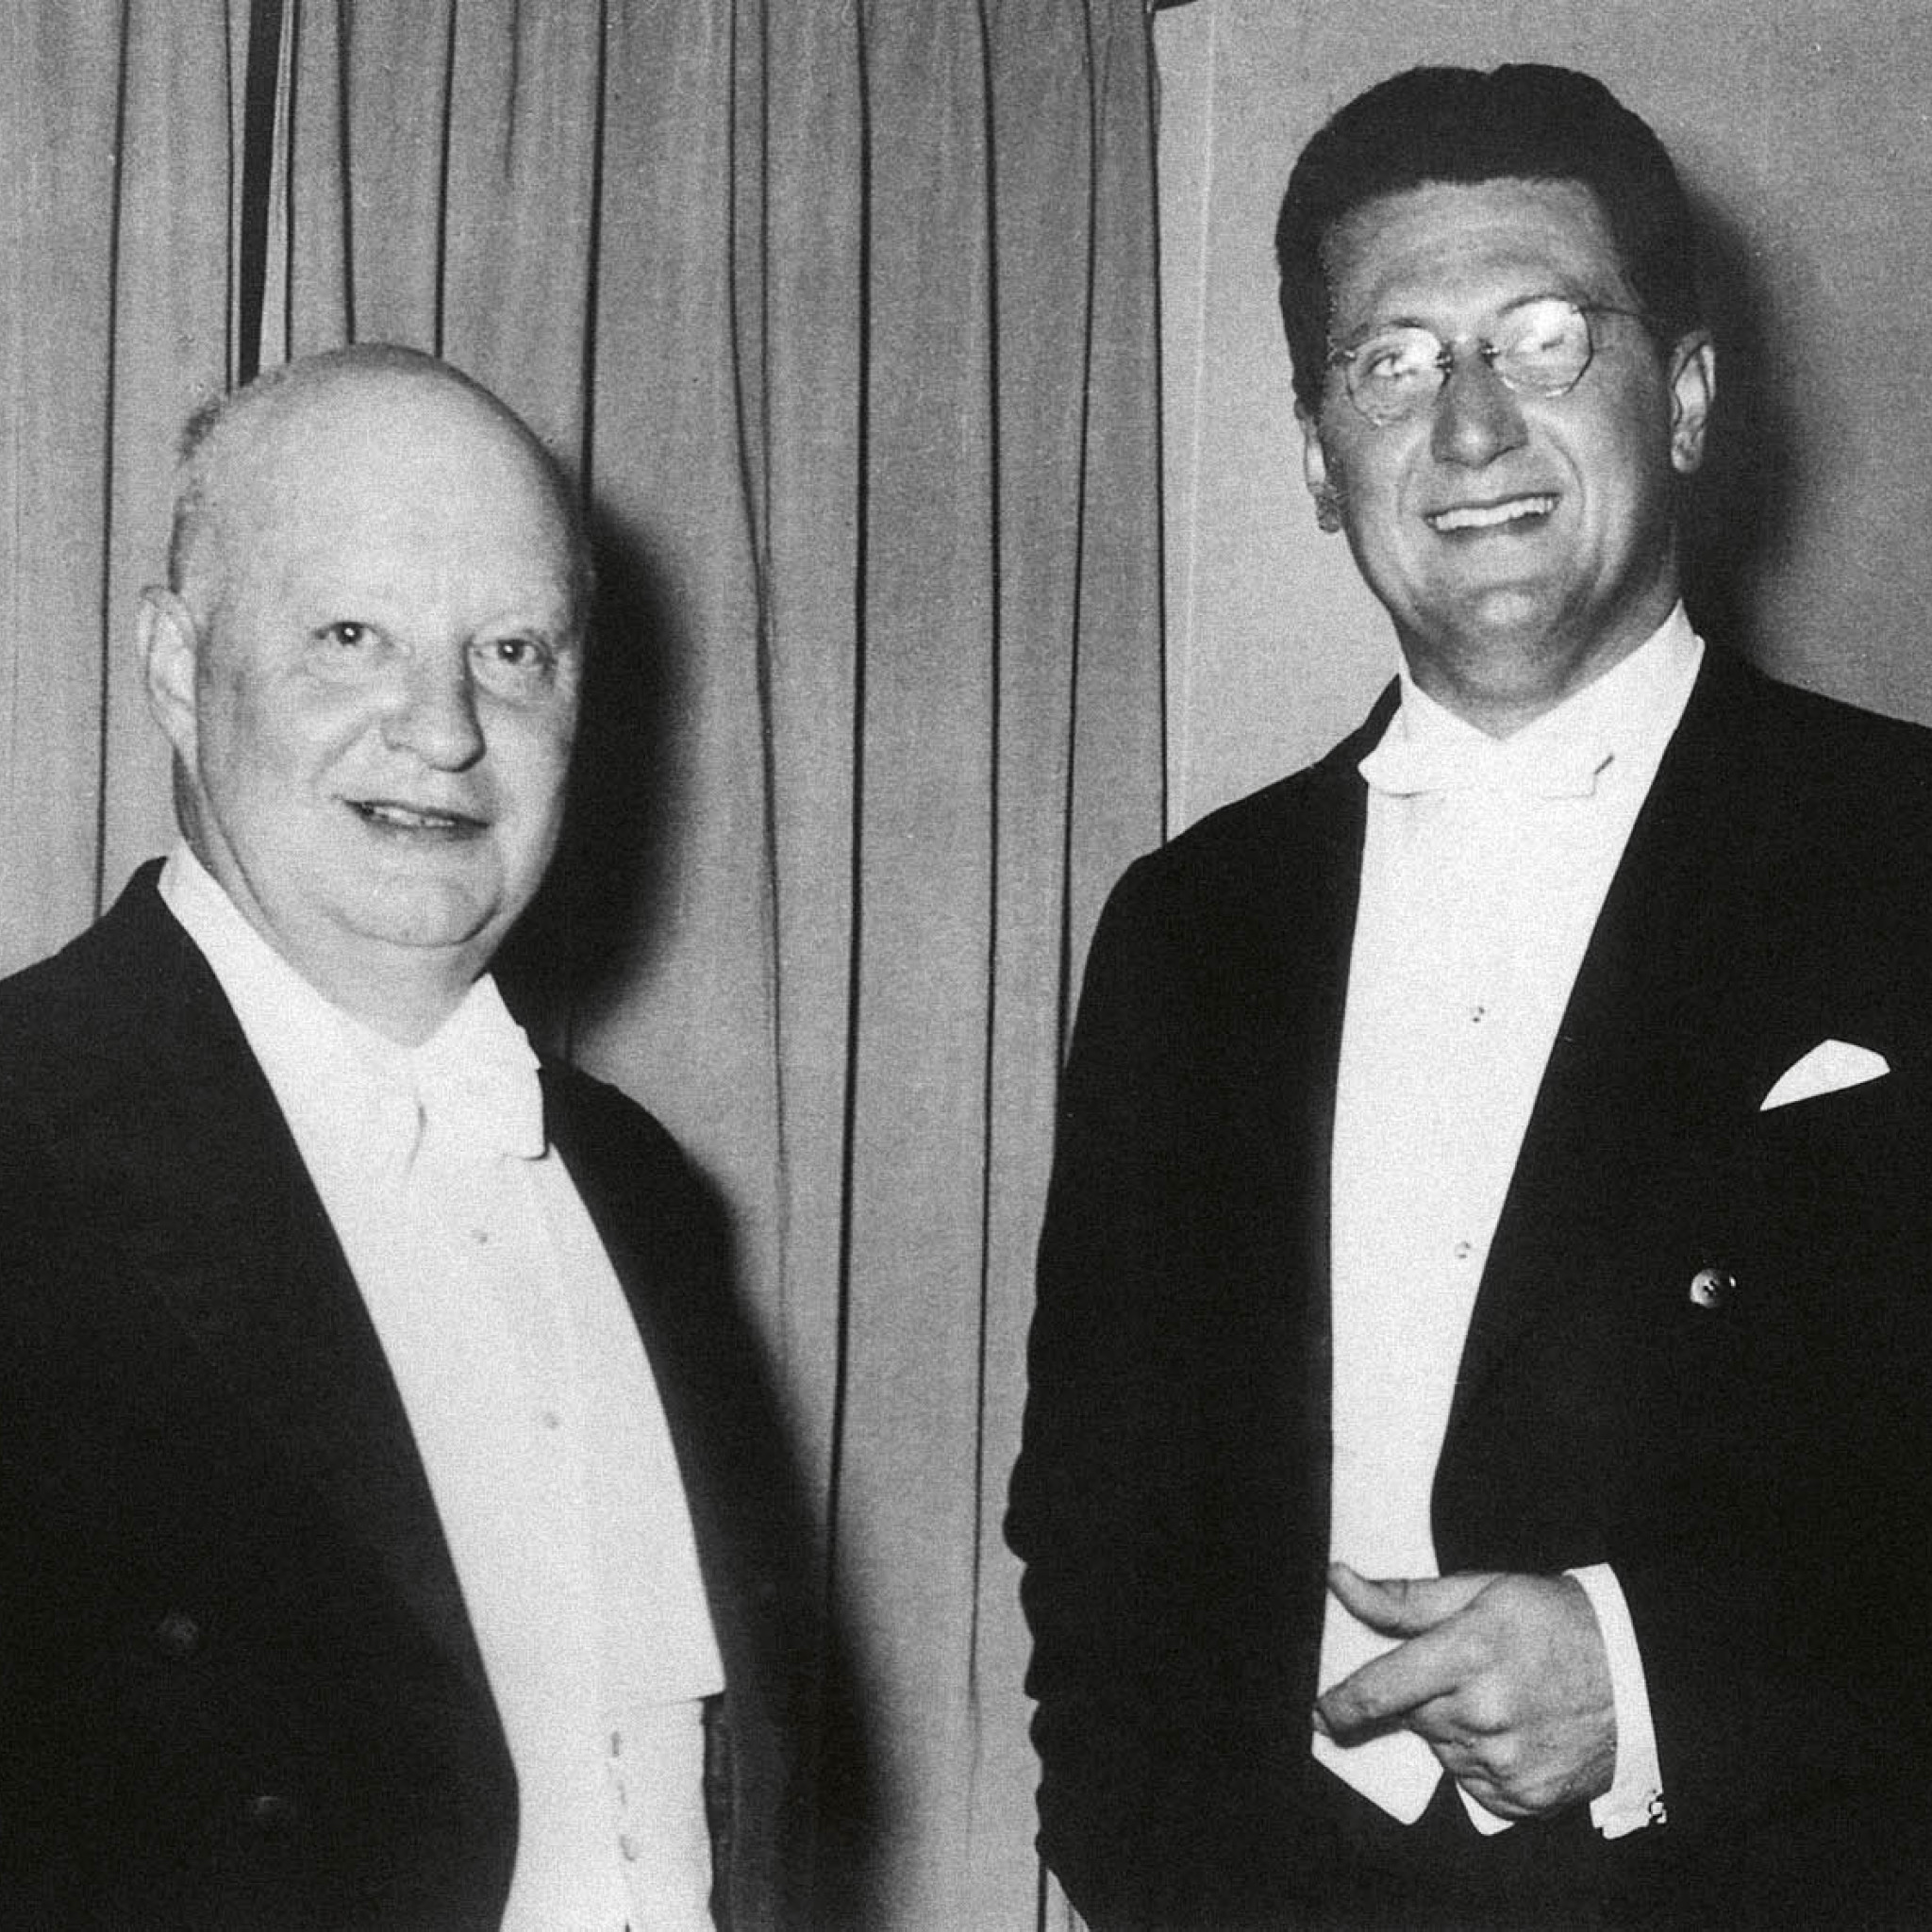 Wolfgang Schneiderhan with Paul Hindemith